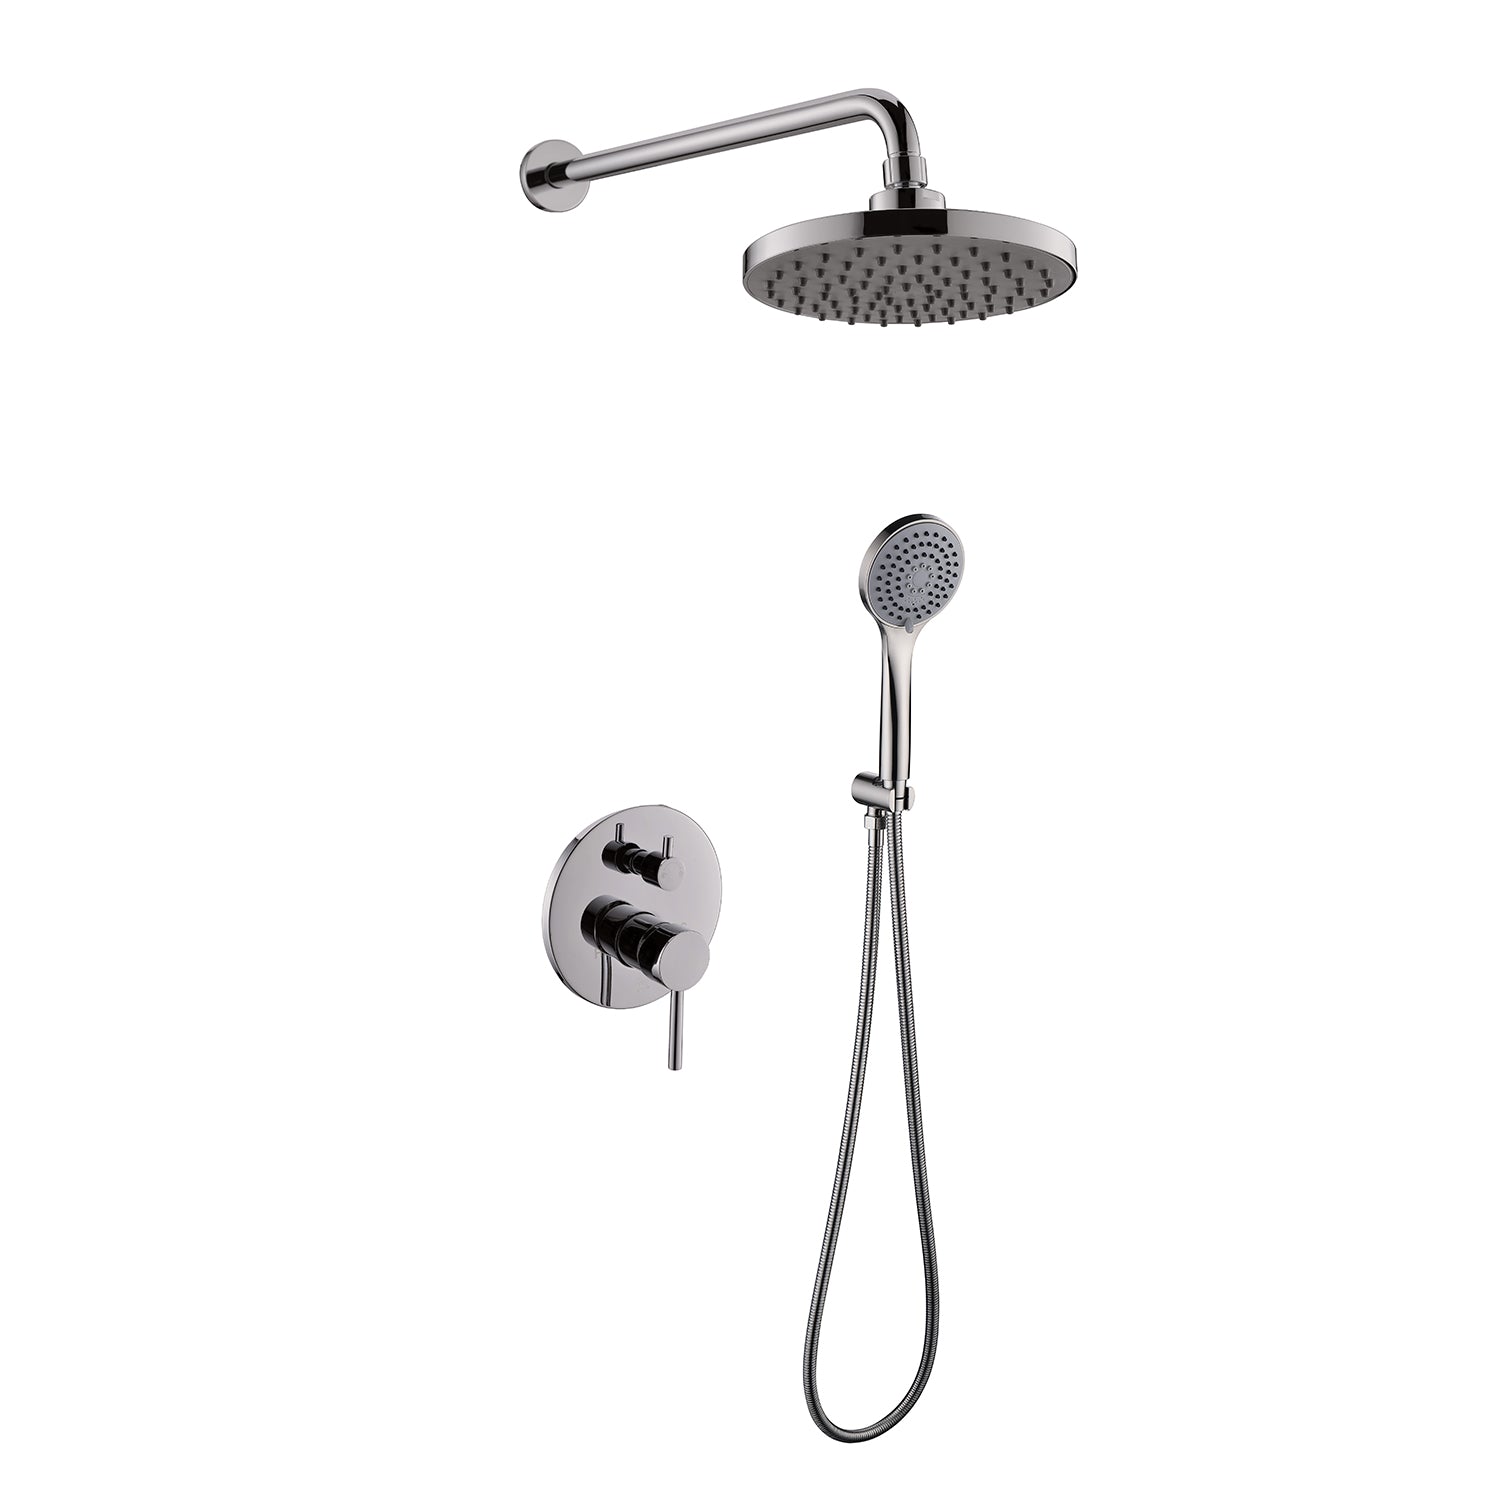 DAX Bathroom Rain Mixer Shower, Round Rainfall Shower Head System with Shower Trim and Hand Shower, Wall Mount, Brushed Nickel Finish (DAX-6813-BN)